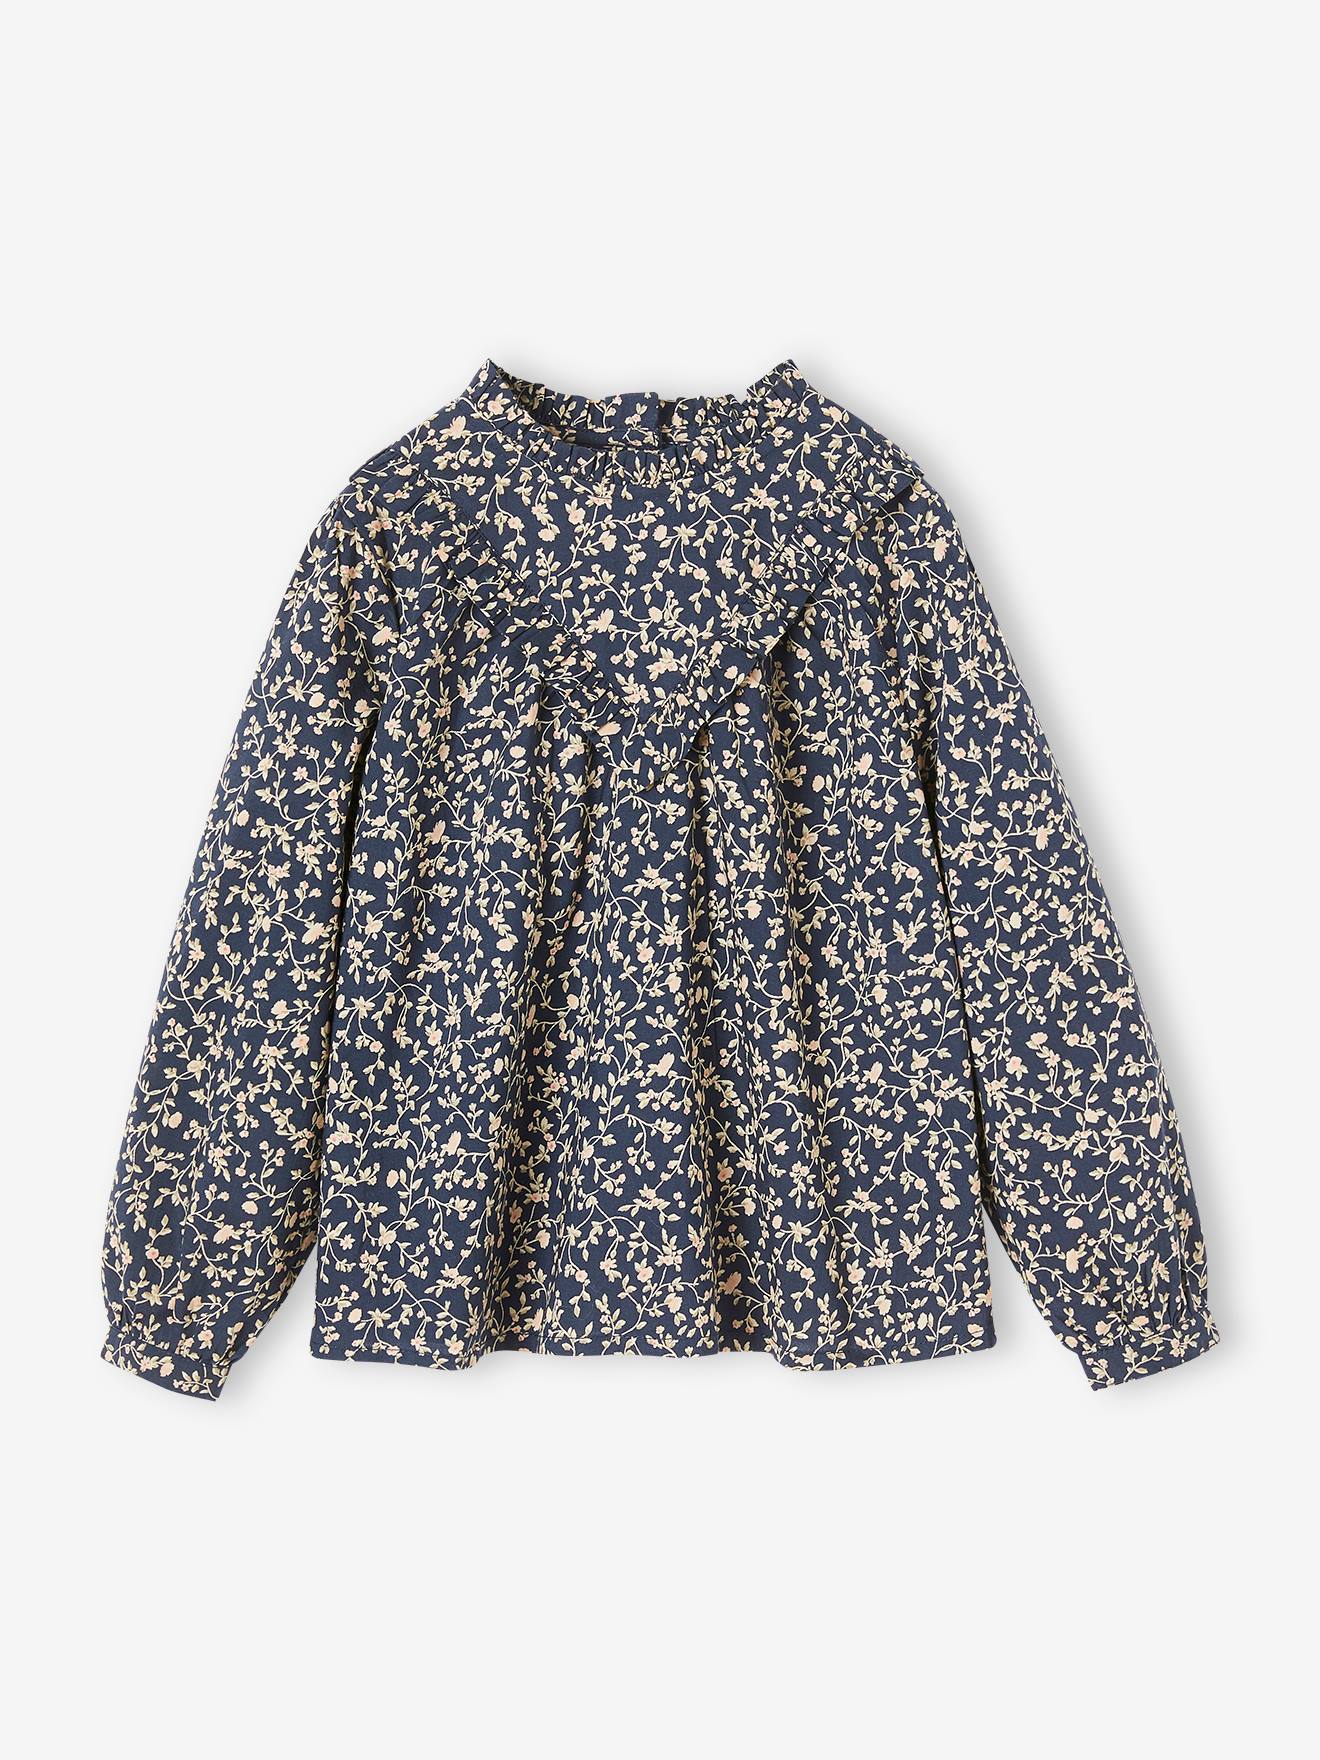 Blouse with Crew Neck & Floral Print for Girls navy blue